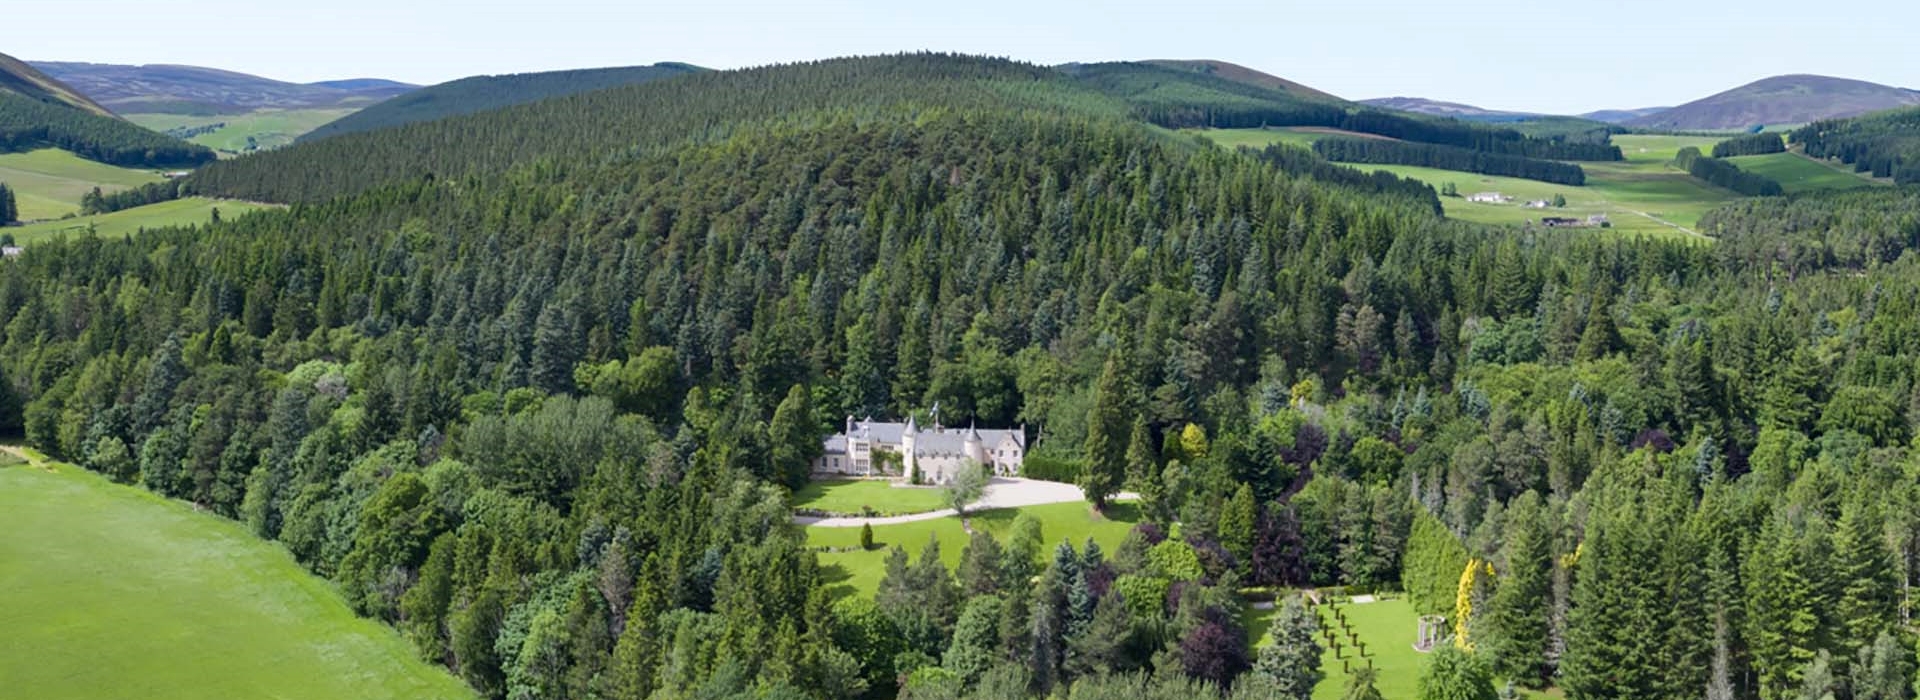 Luxury Scotland: Castles, Whisky Tasting and Exclusive Tours